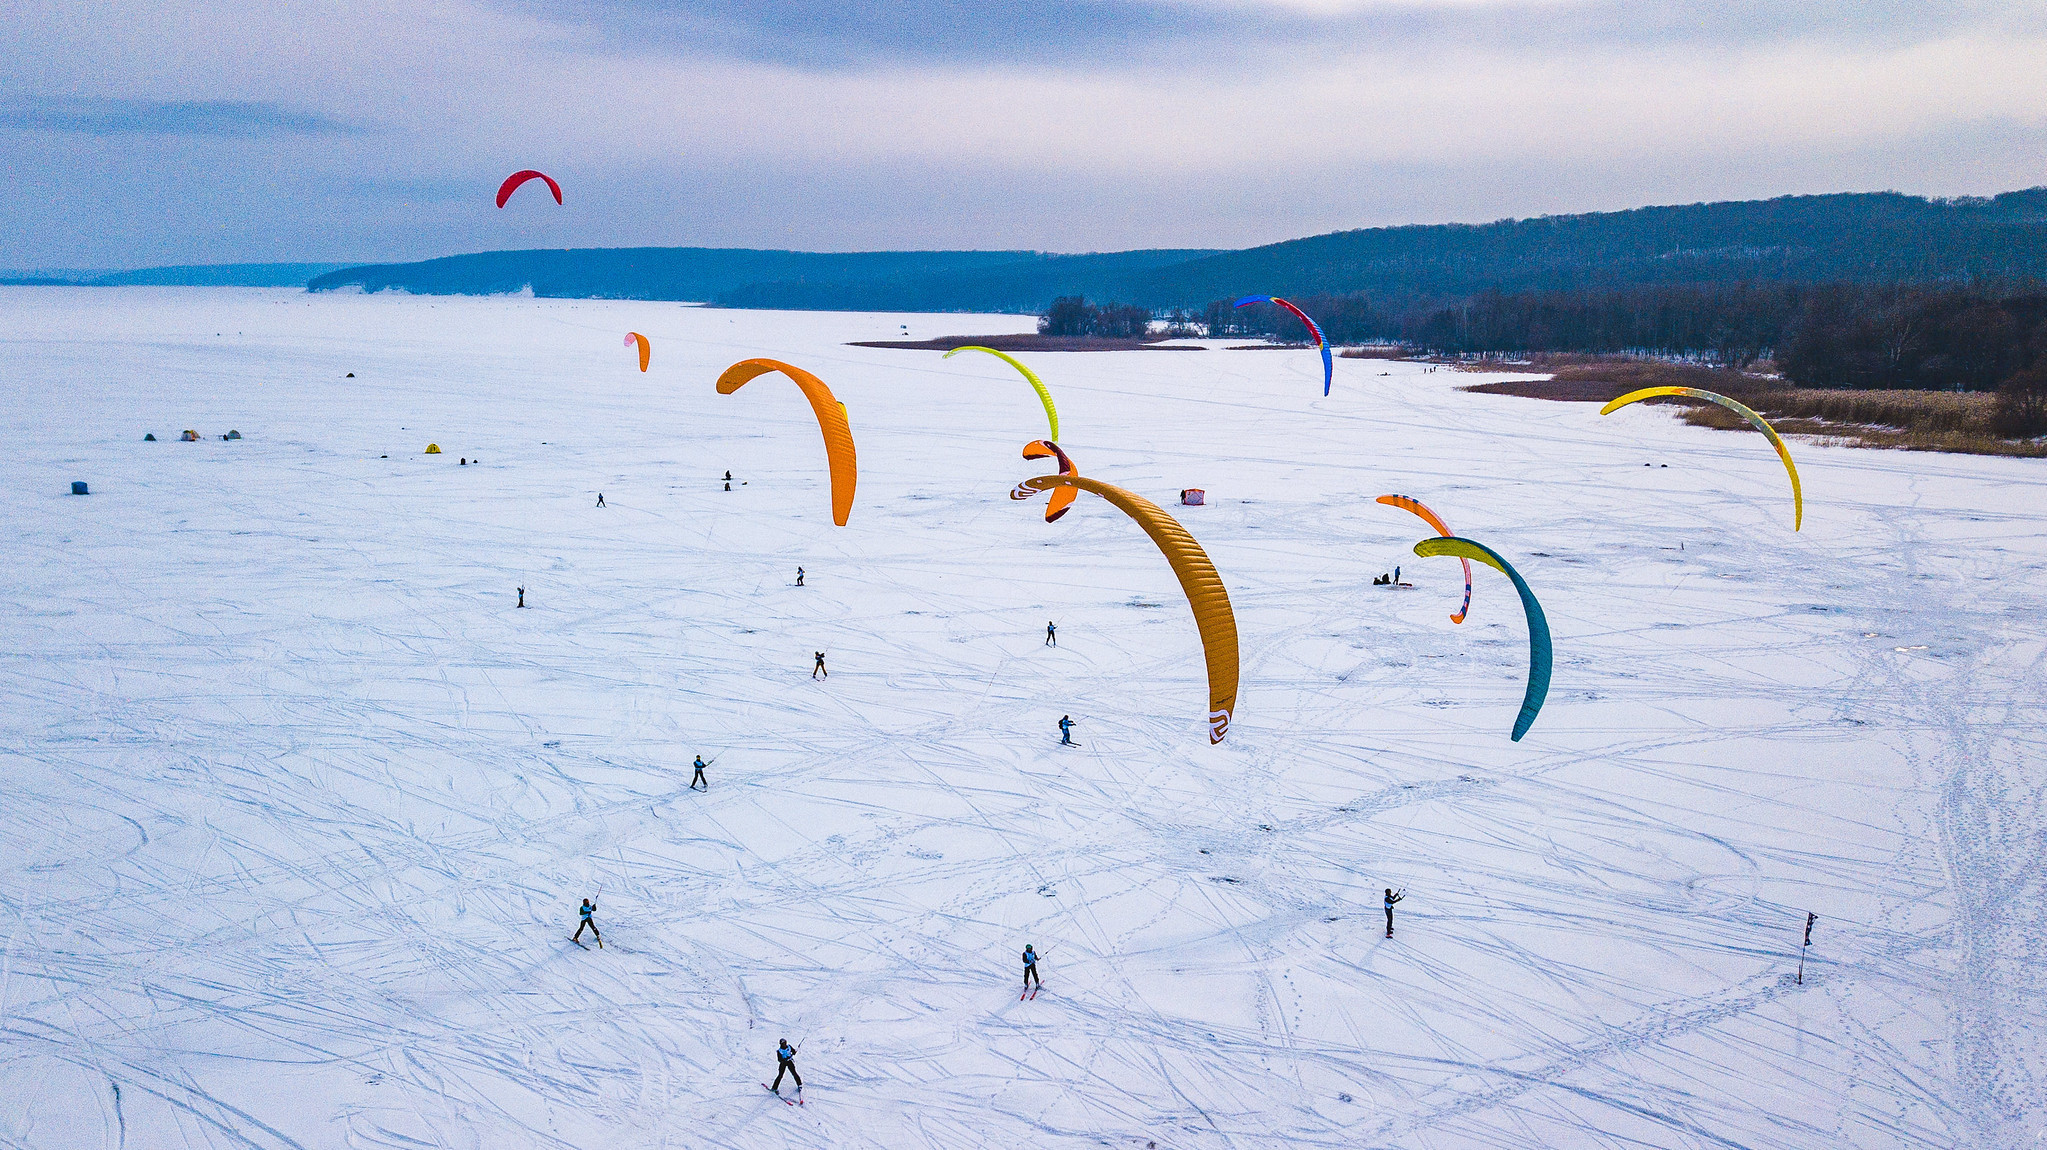 Yasnolobov wins again at SnowKite World Cup in Roccaraso